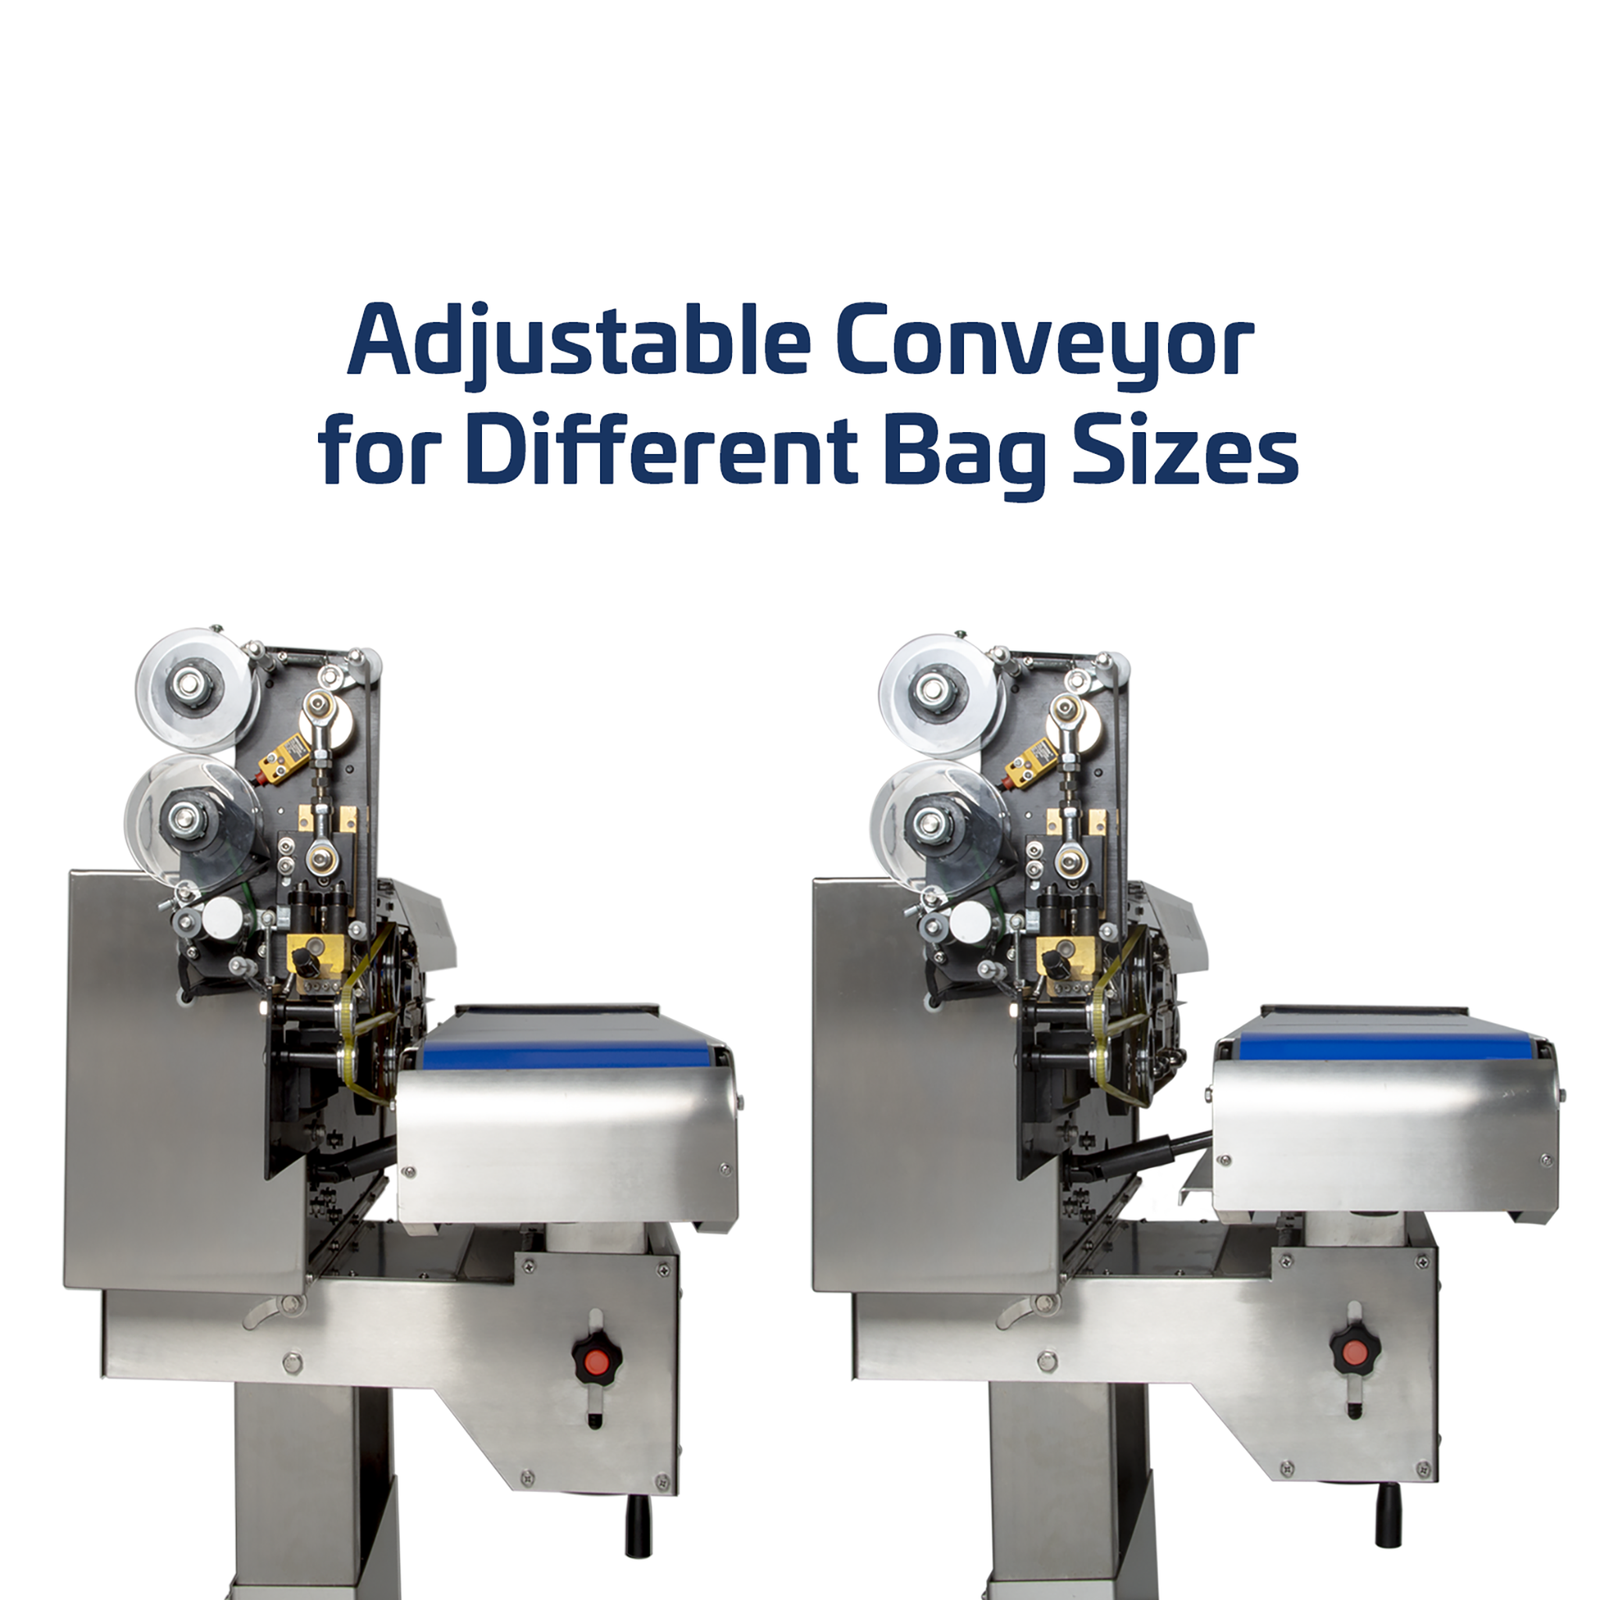 Two JORESTECH horizontal continuous band sealers next to each other to indicate that the portion of the revolving band can be separated from the body of the bag sealer to seal larger bags.